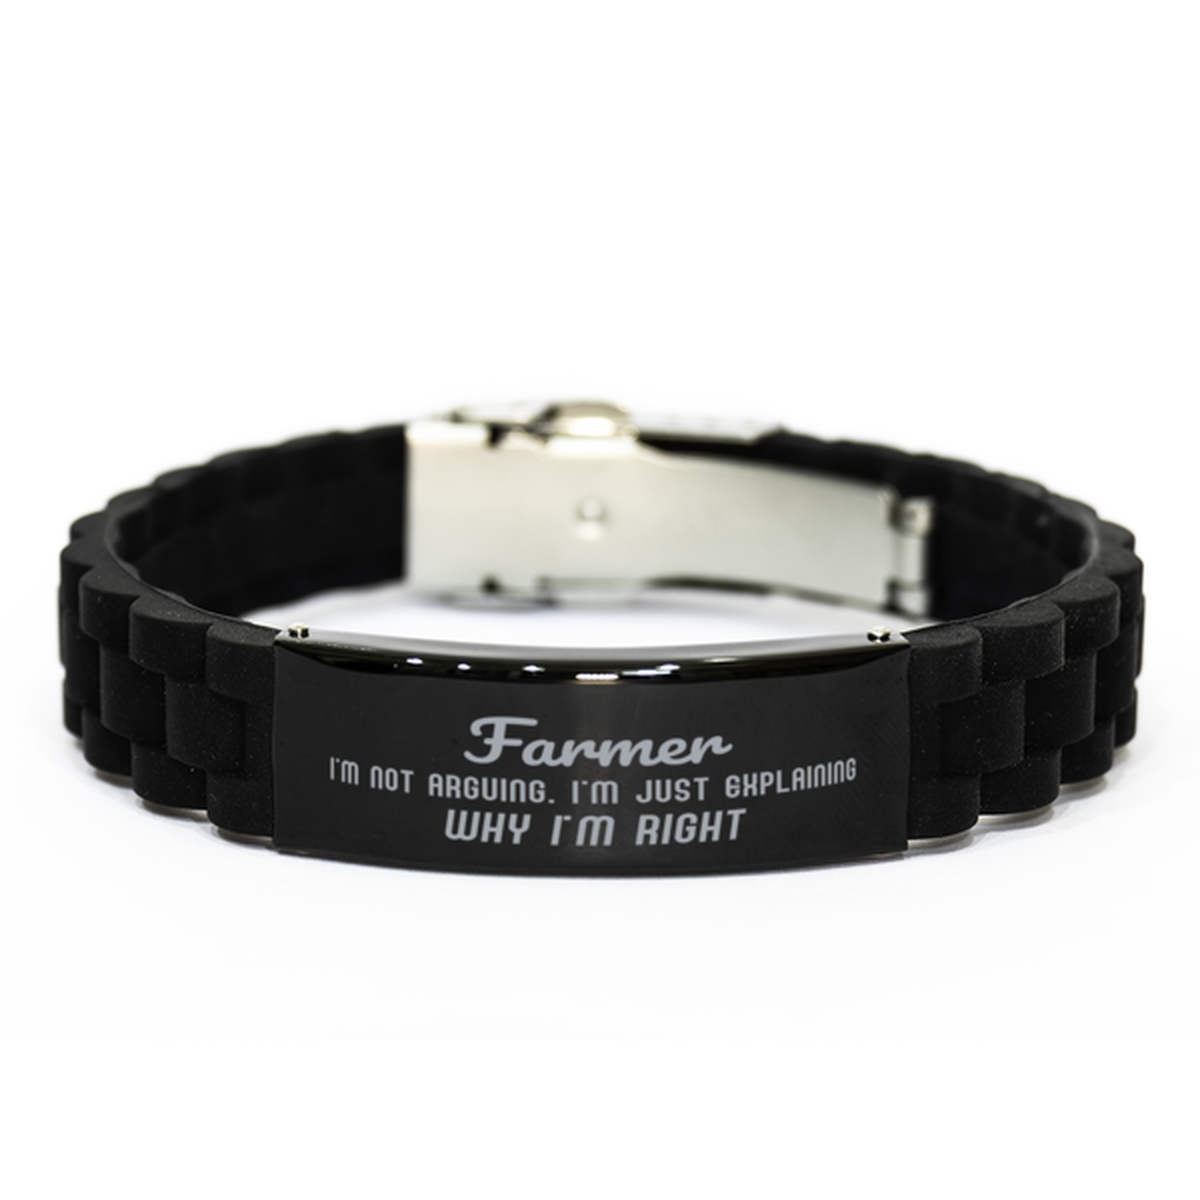 Farmer I'm not Arguing. I'm Just Explaining Why I'm RIGHT Black Glidelock Clasp Bracelet, Funny Saying Quote Farmer Gifts For Farmer Graduation Birthday Christmas Gifts for Men Women Coworker